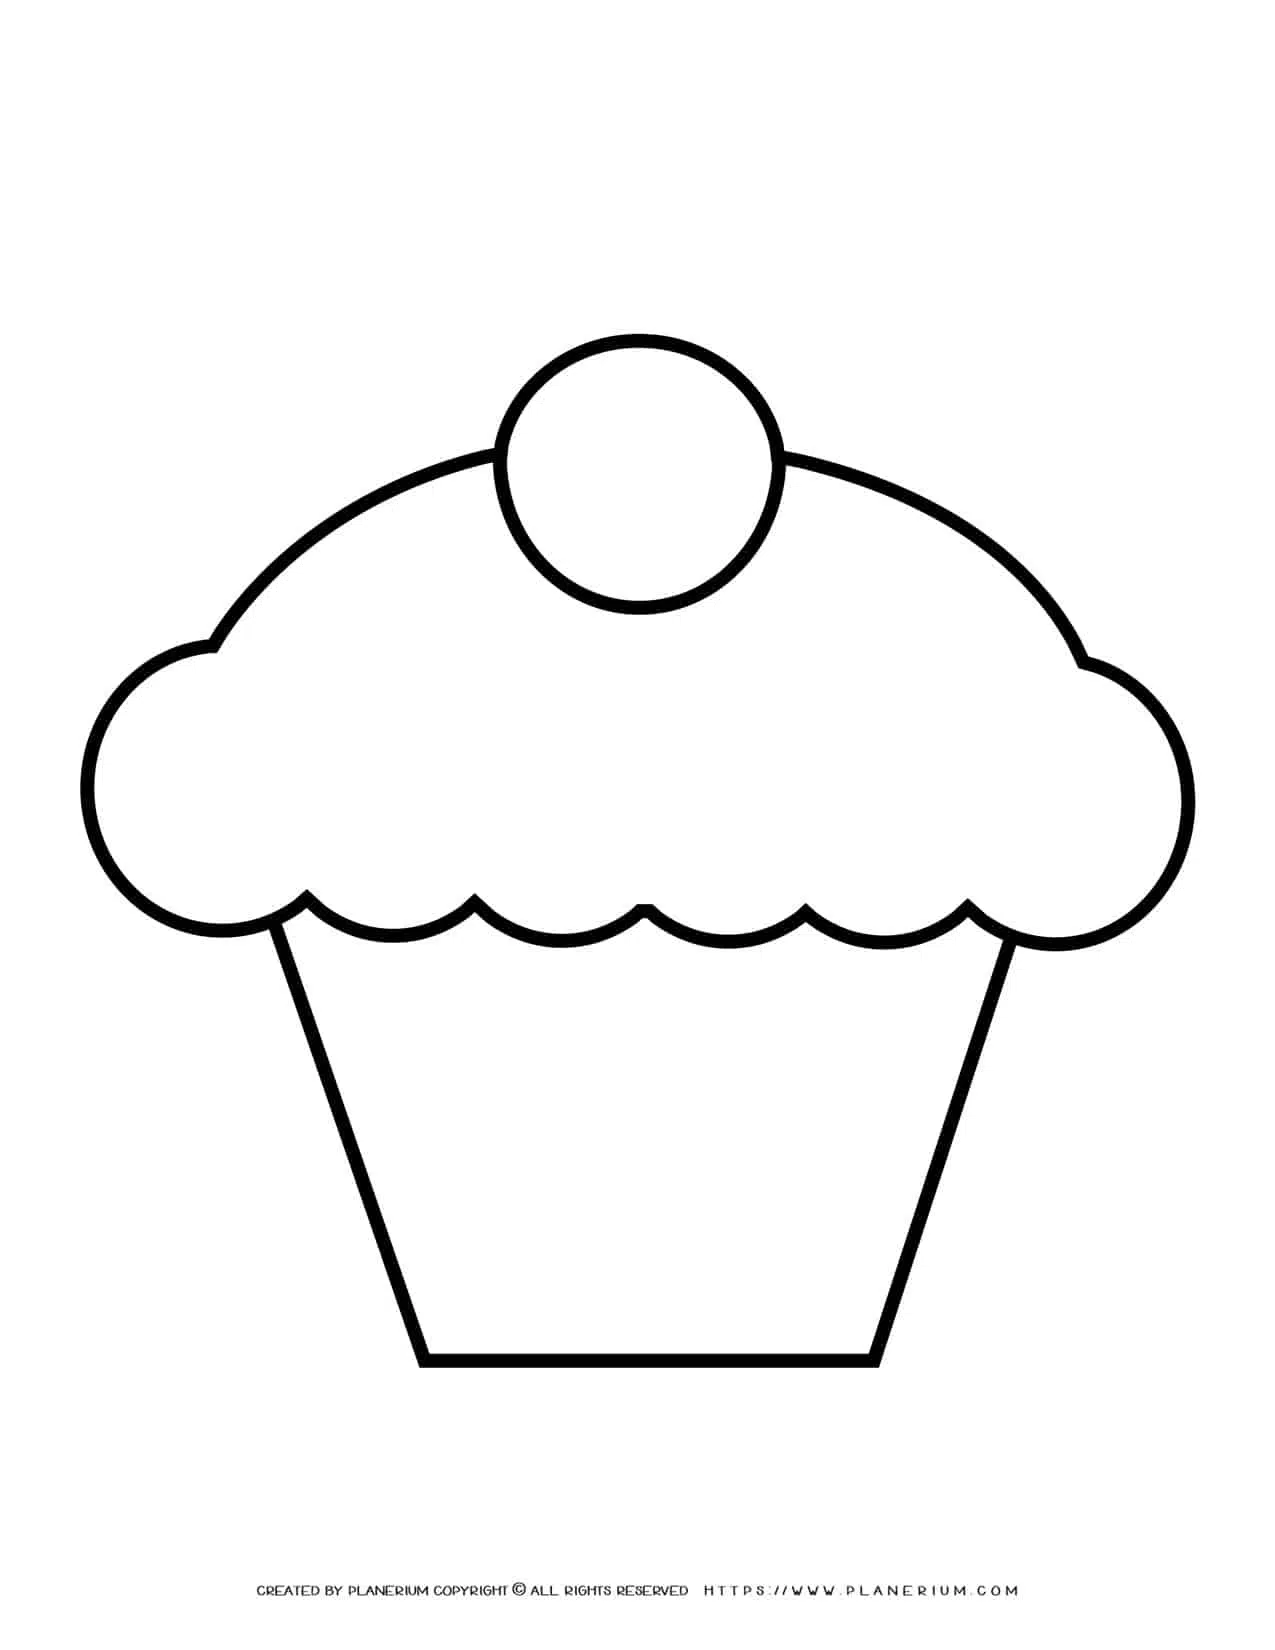 Discover more than 67 cup cake outline images awesomeenglish edu vn